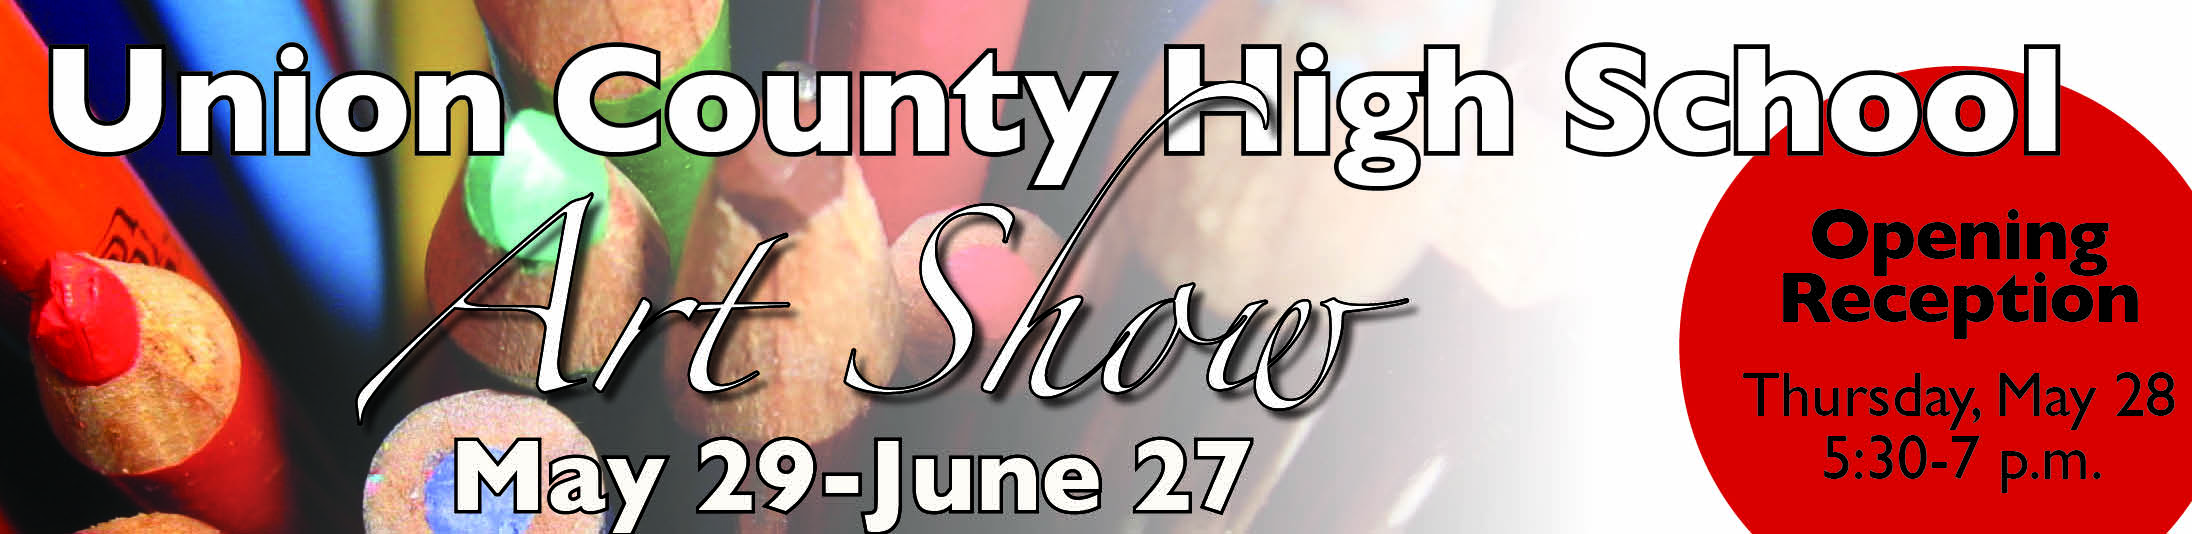 Union County High School Art Show May 29-June 27, 2015